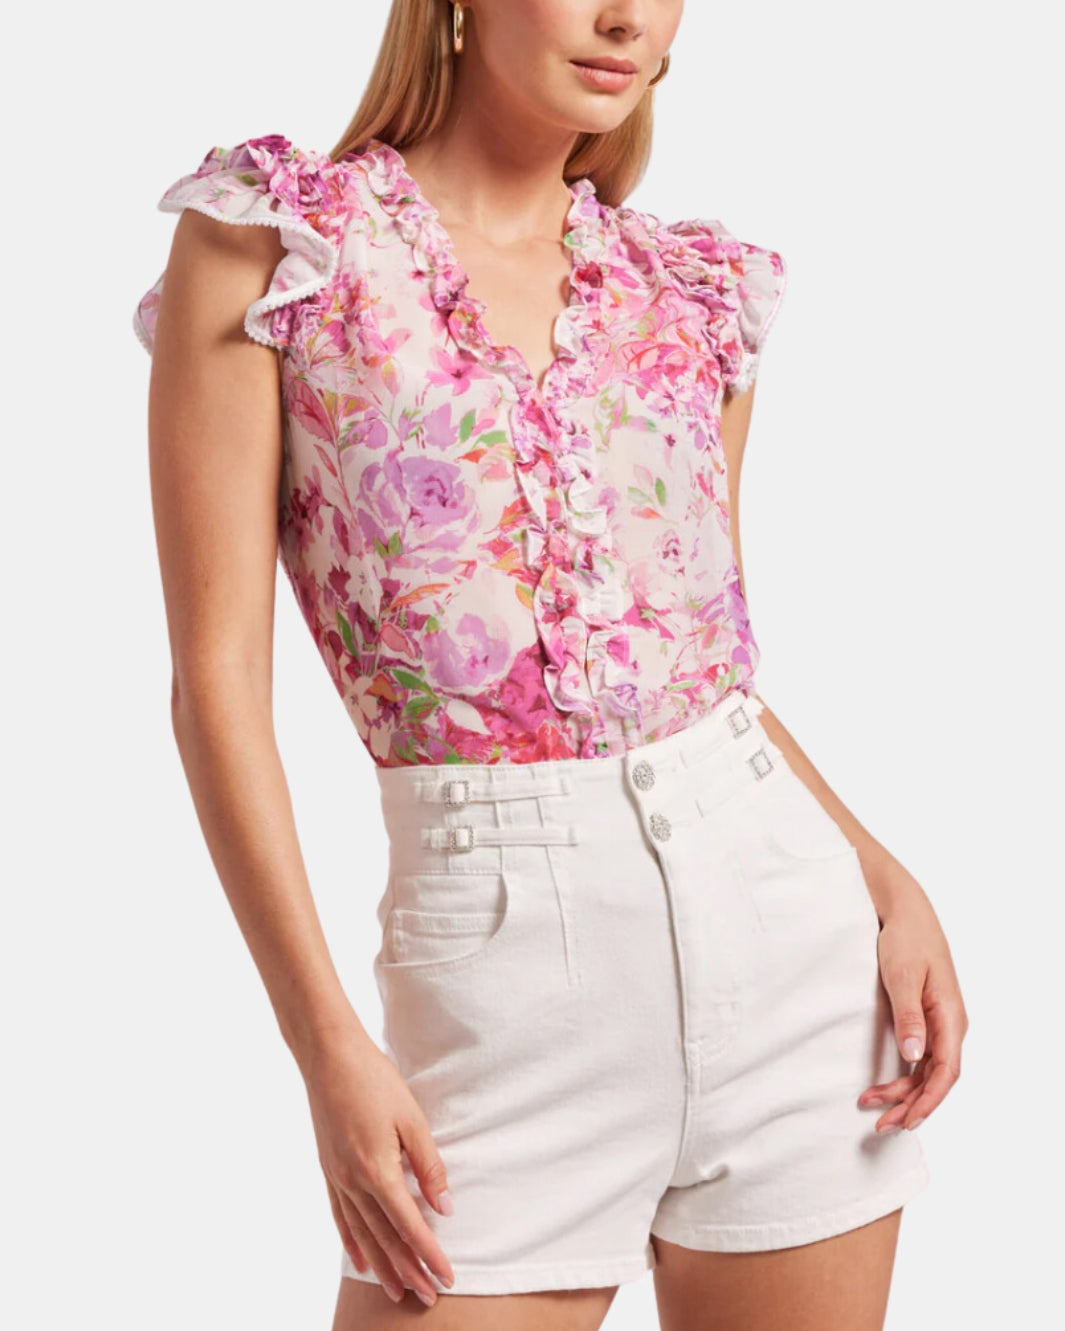 SEANA FLORAL TOP IN FLORAL PINK - Romi Boutique